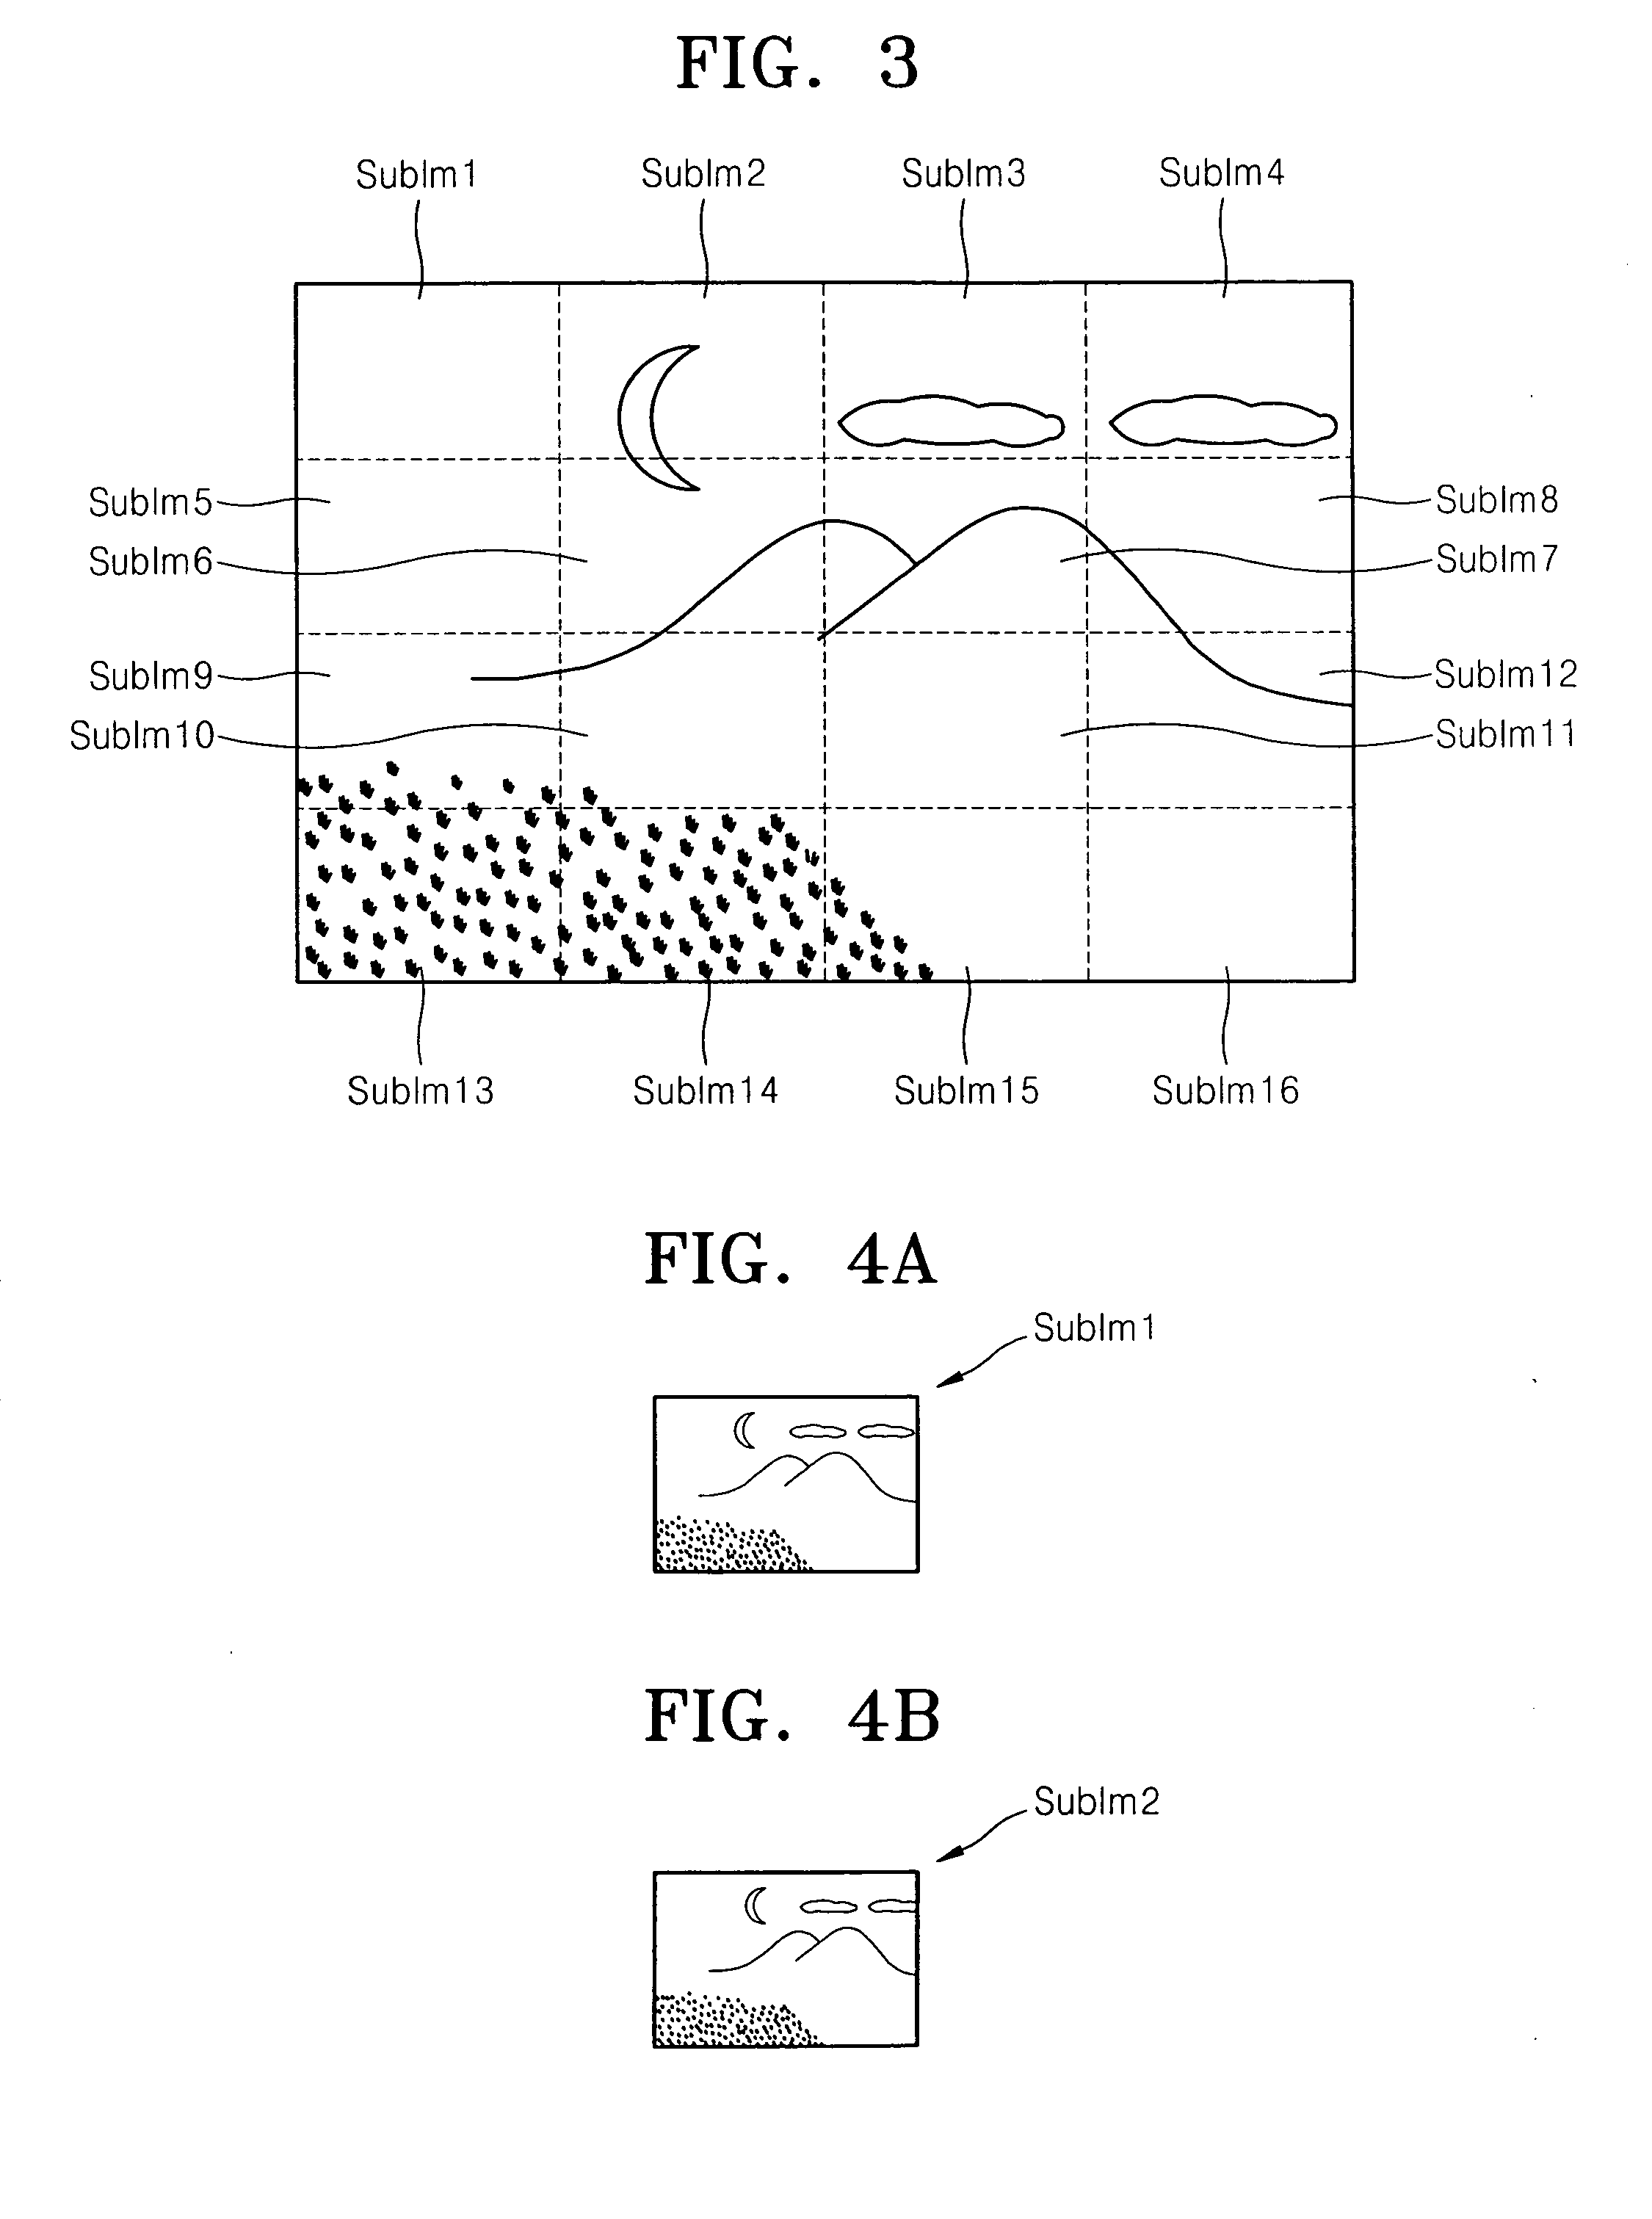 Digital image processing apparatus, a method of controlling the same, and a digital image compression method